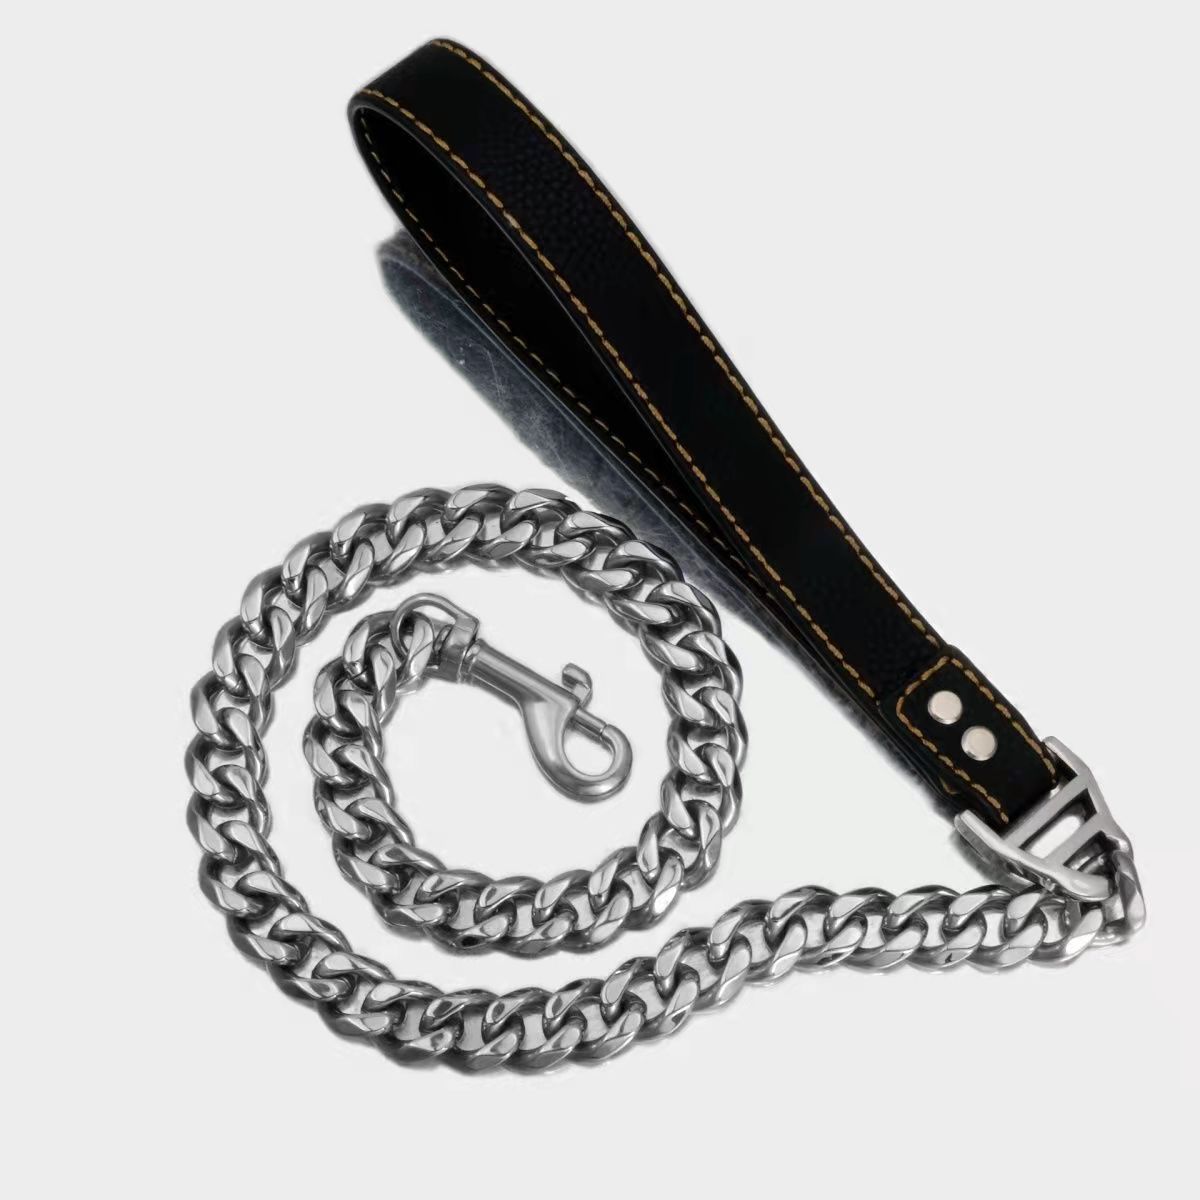 Stainless Steel Dog lead rope